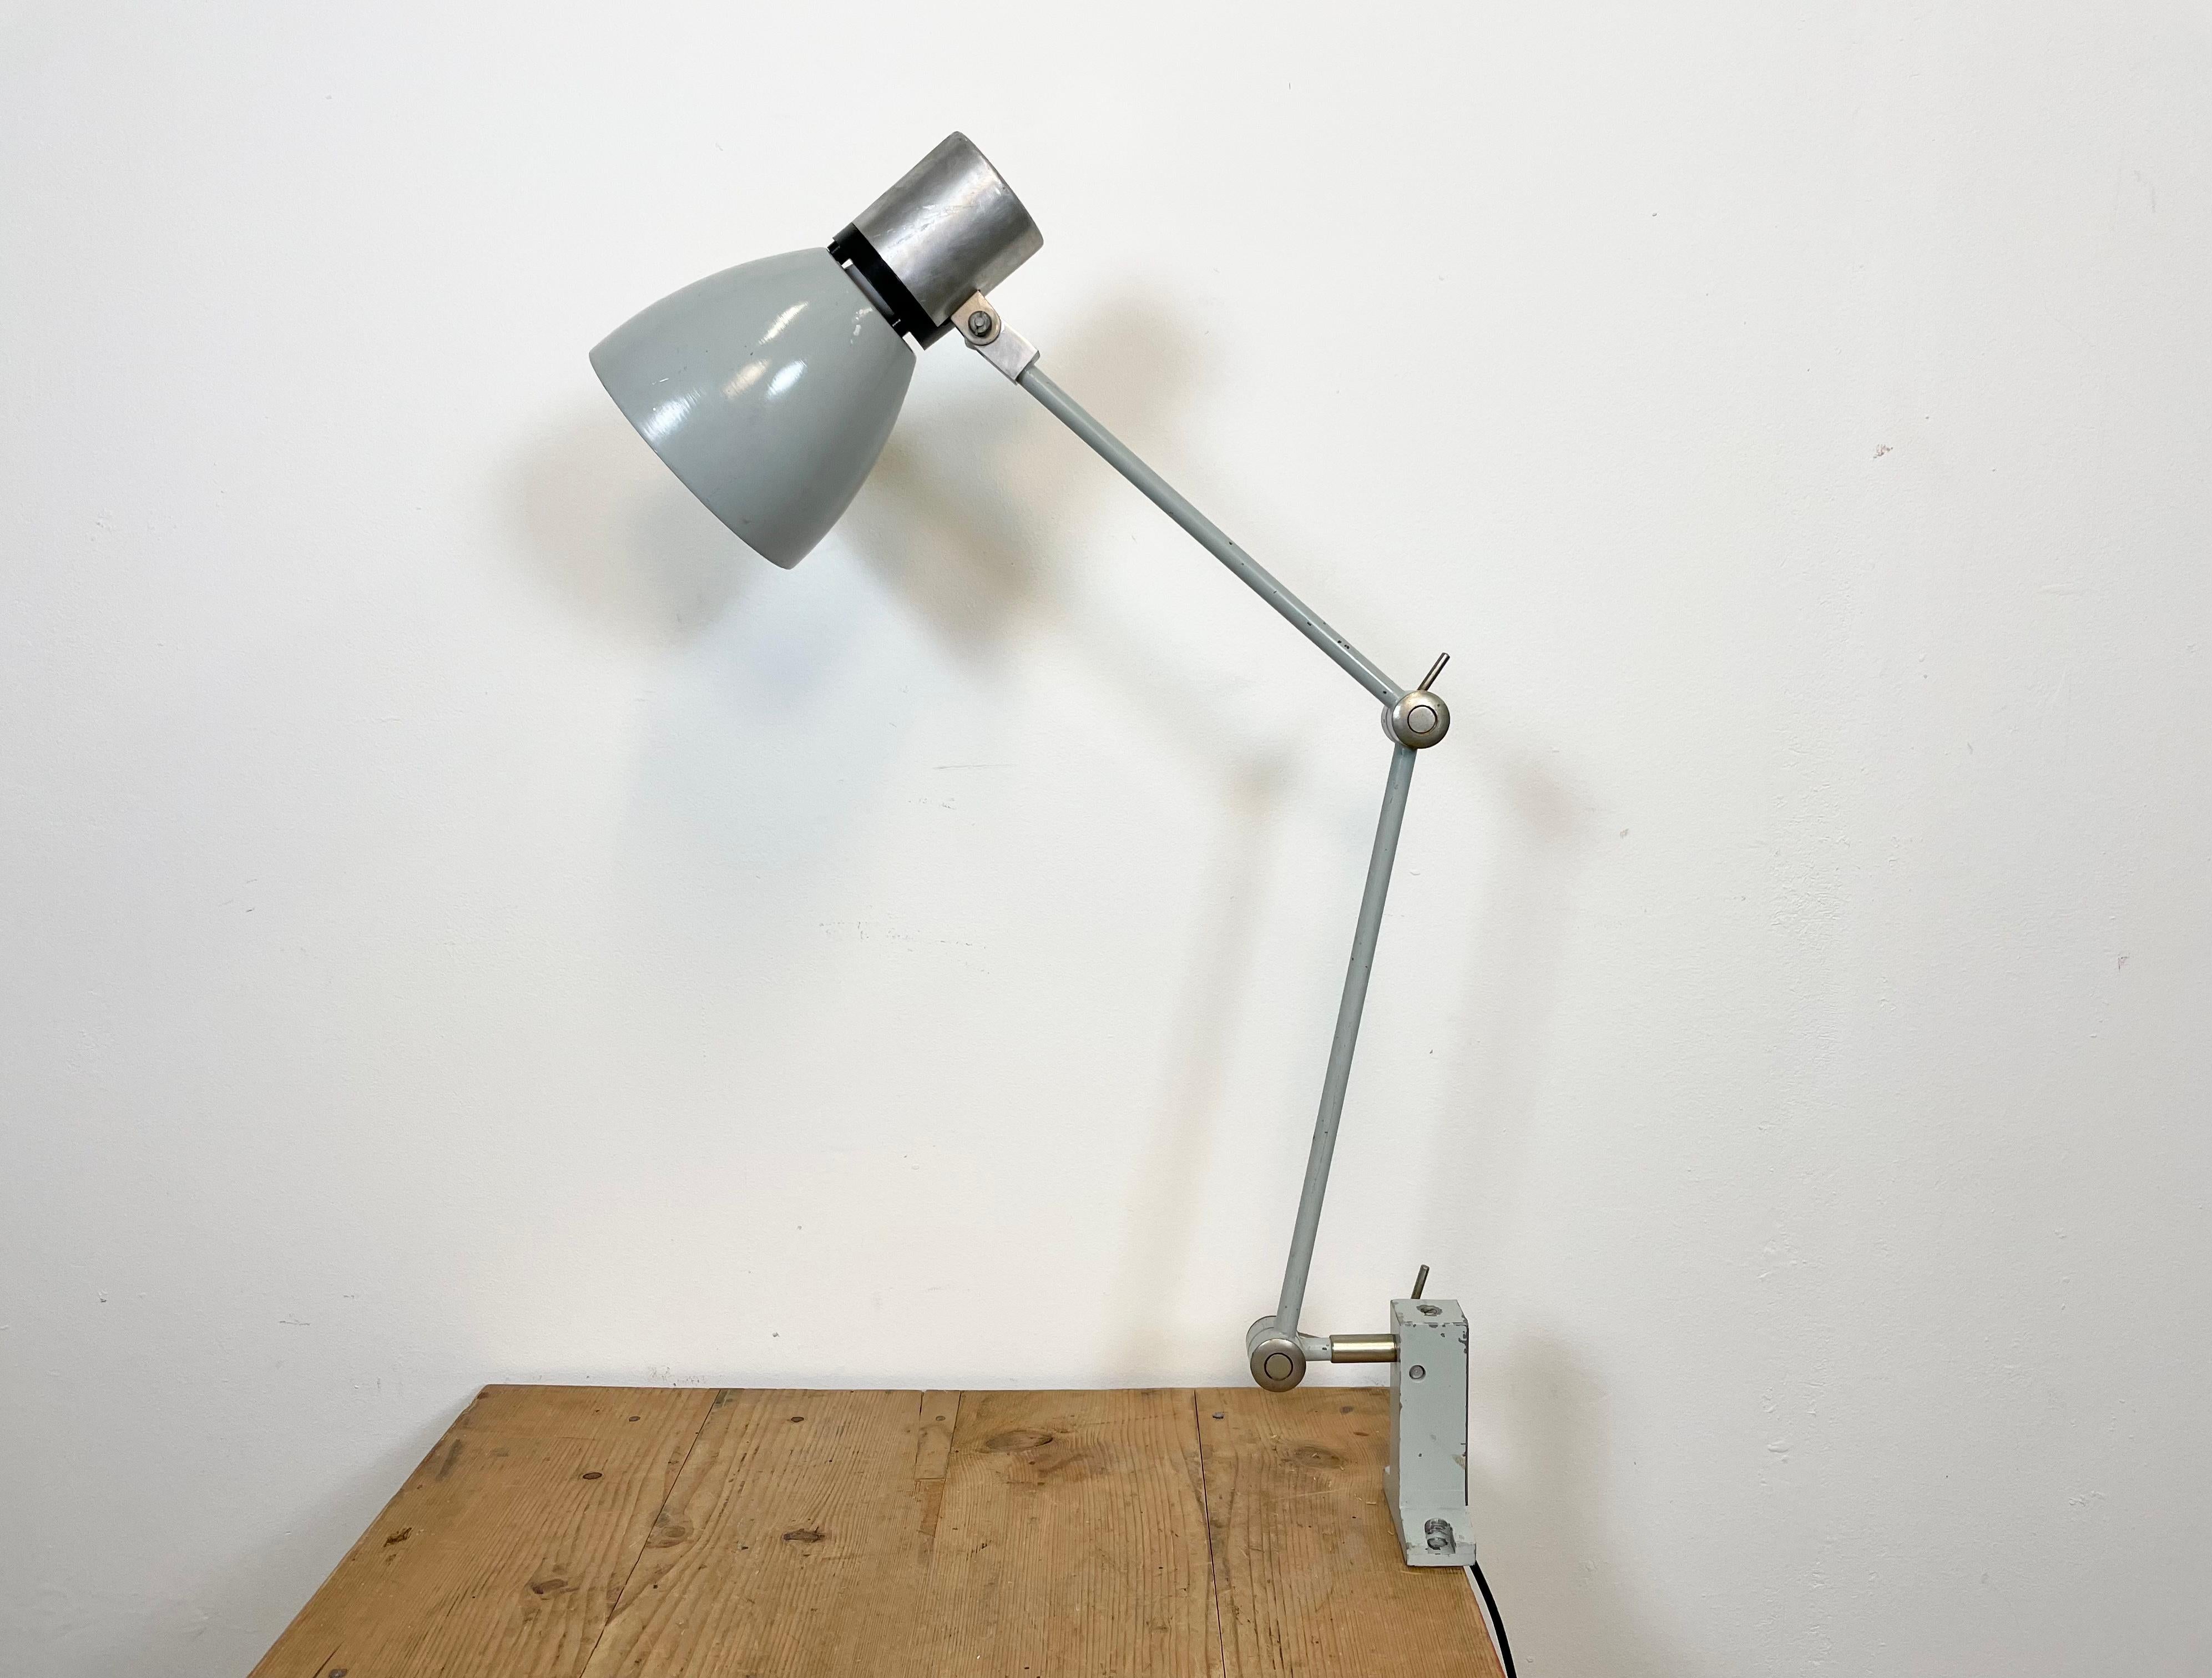 Industrial table lamp made by Elektrosvit in former Czechoslovakia during the 1970s. It features an iron base, an iron arm with three adjustable joints and aluminium shade with original switch on the top. The socket requires E 27 lightbulb. New